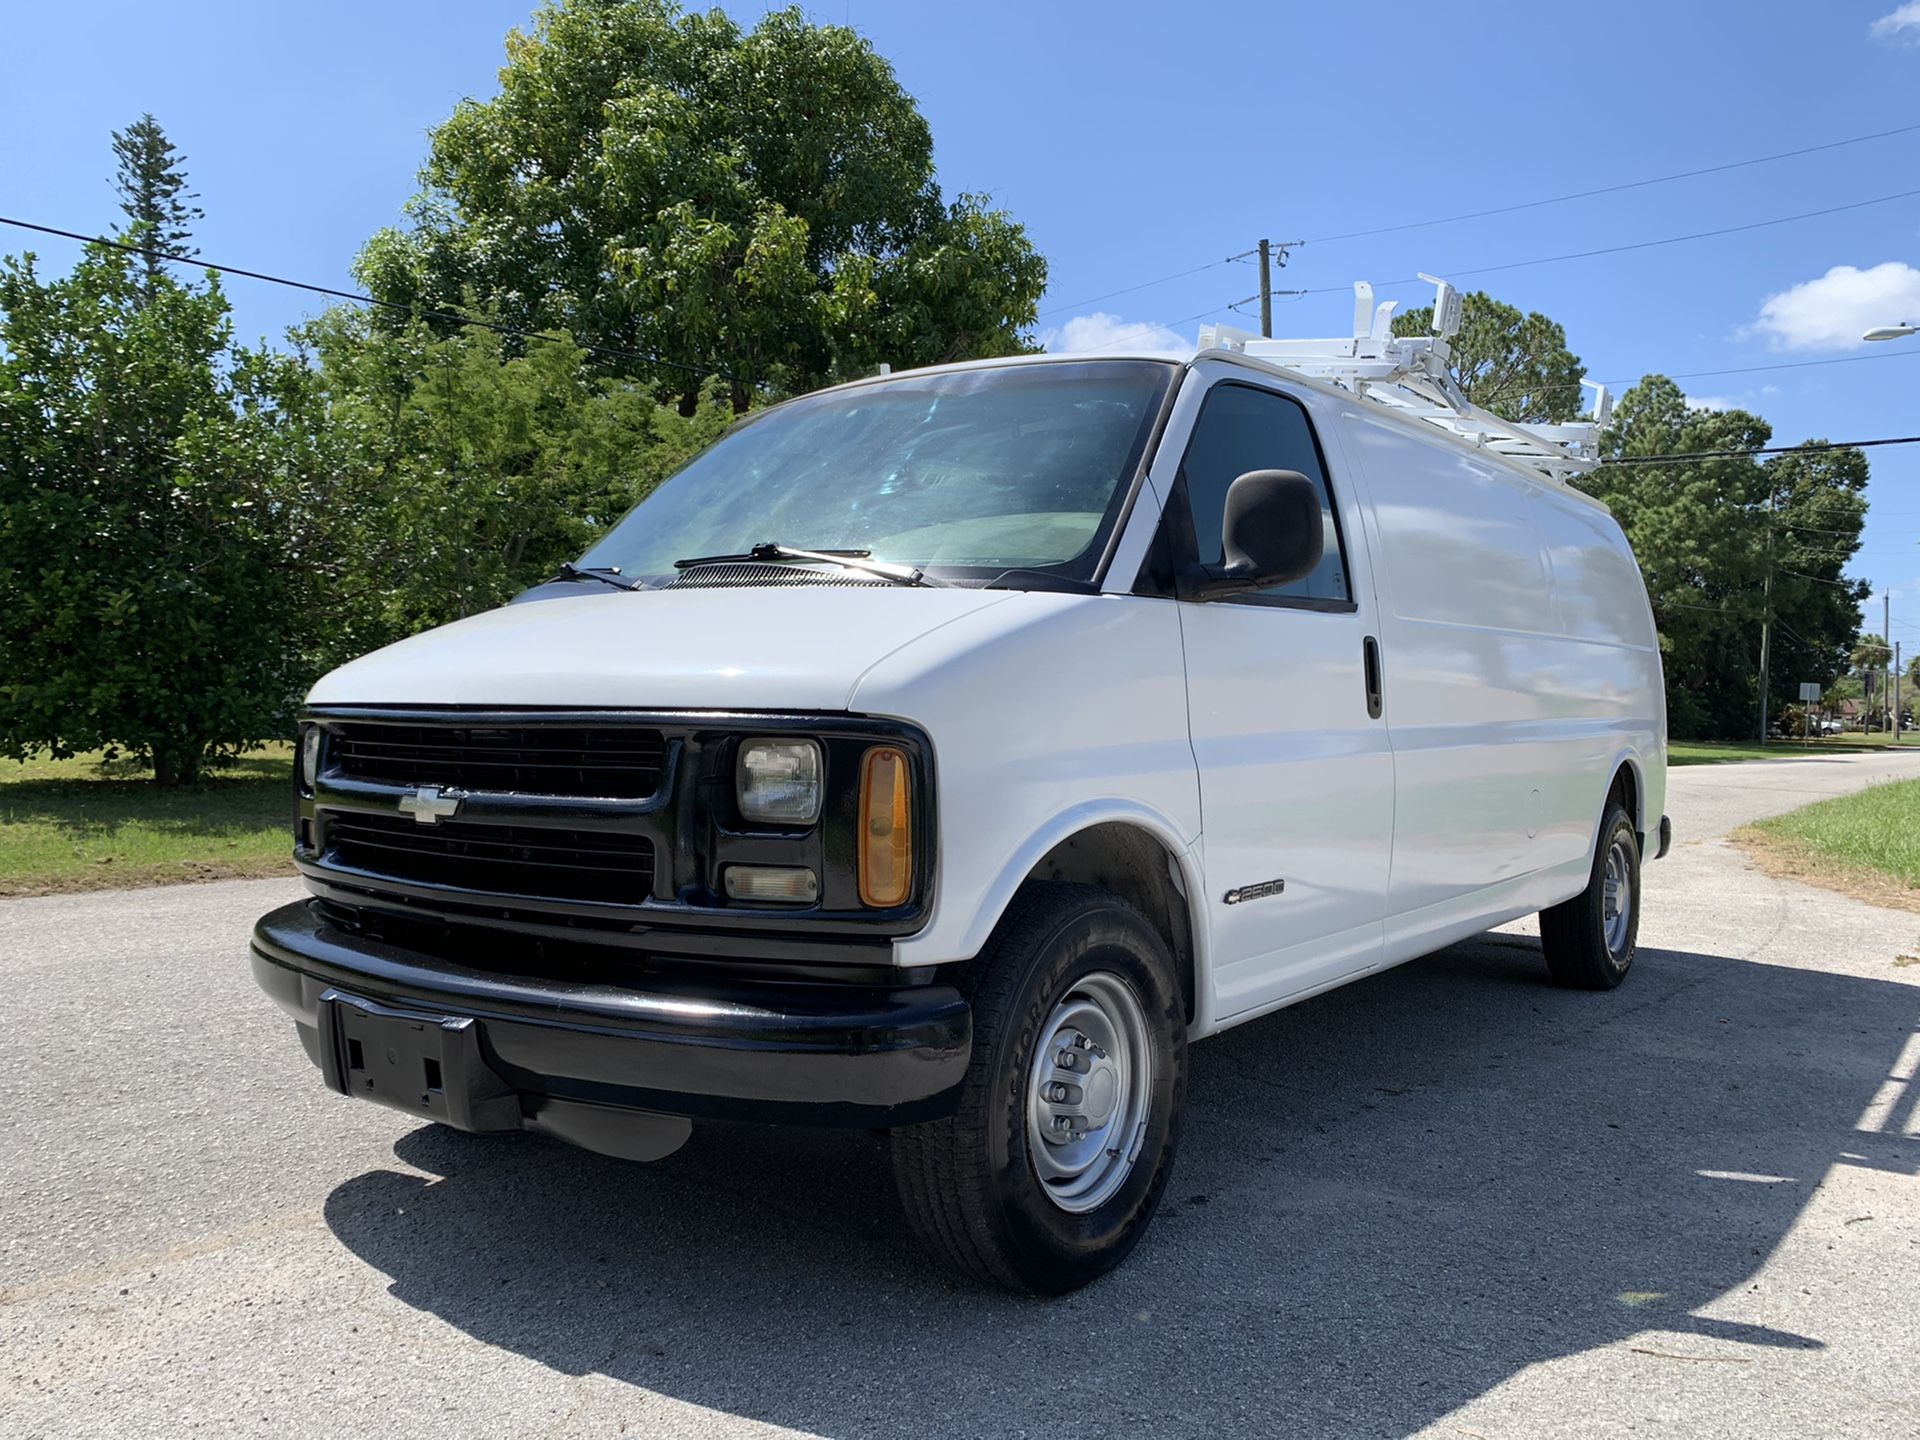 Chevy express g2500 extended cargo van new tires